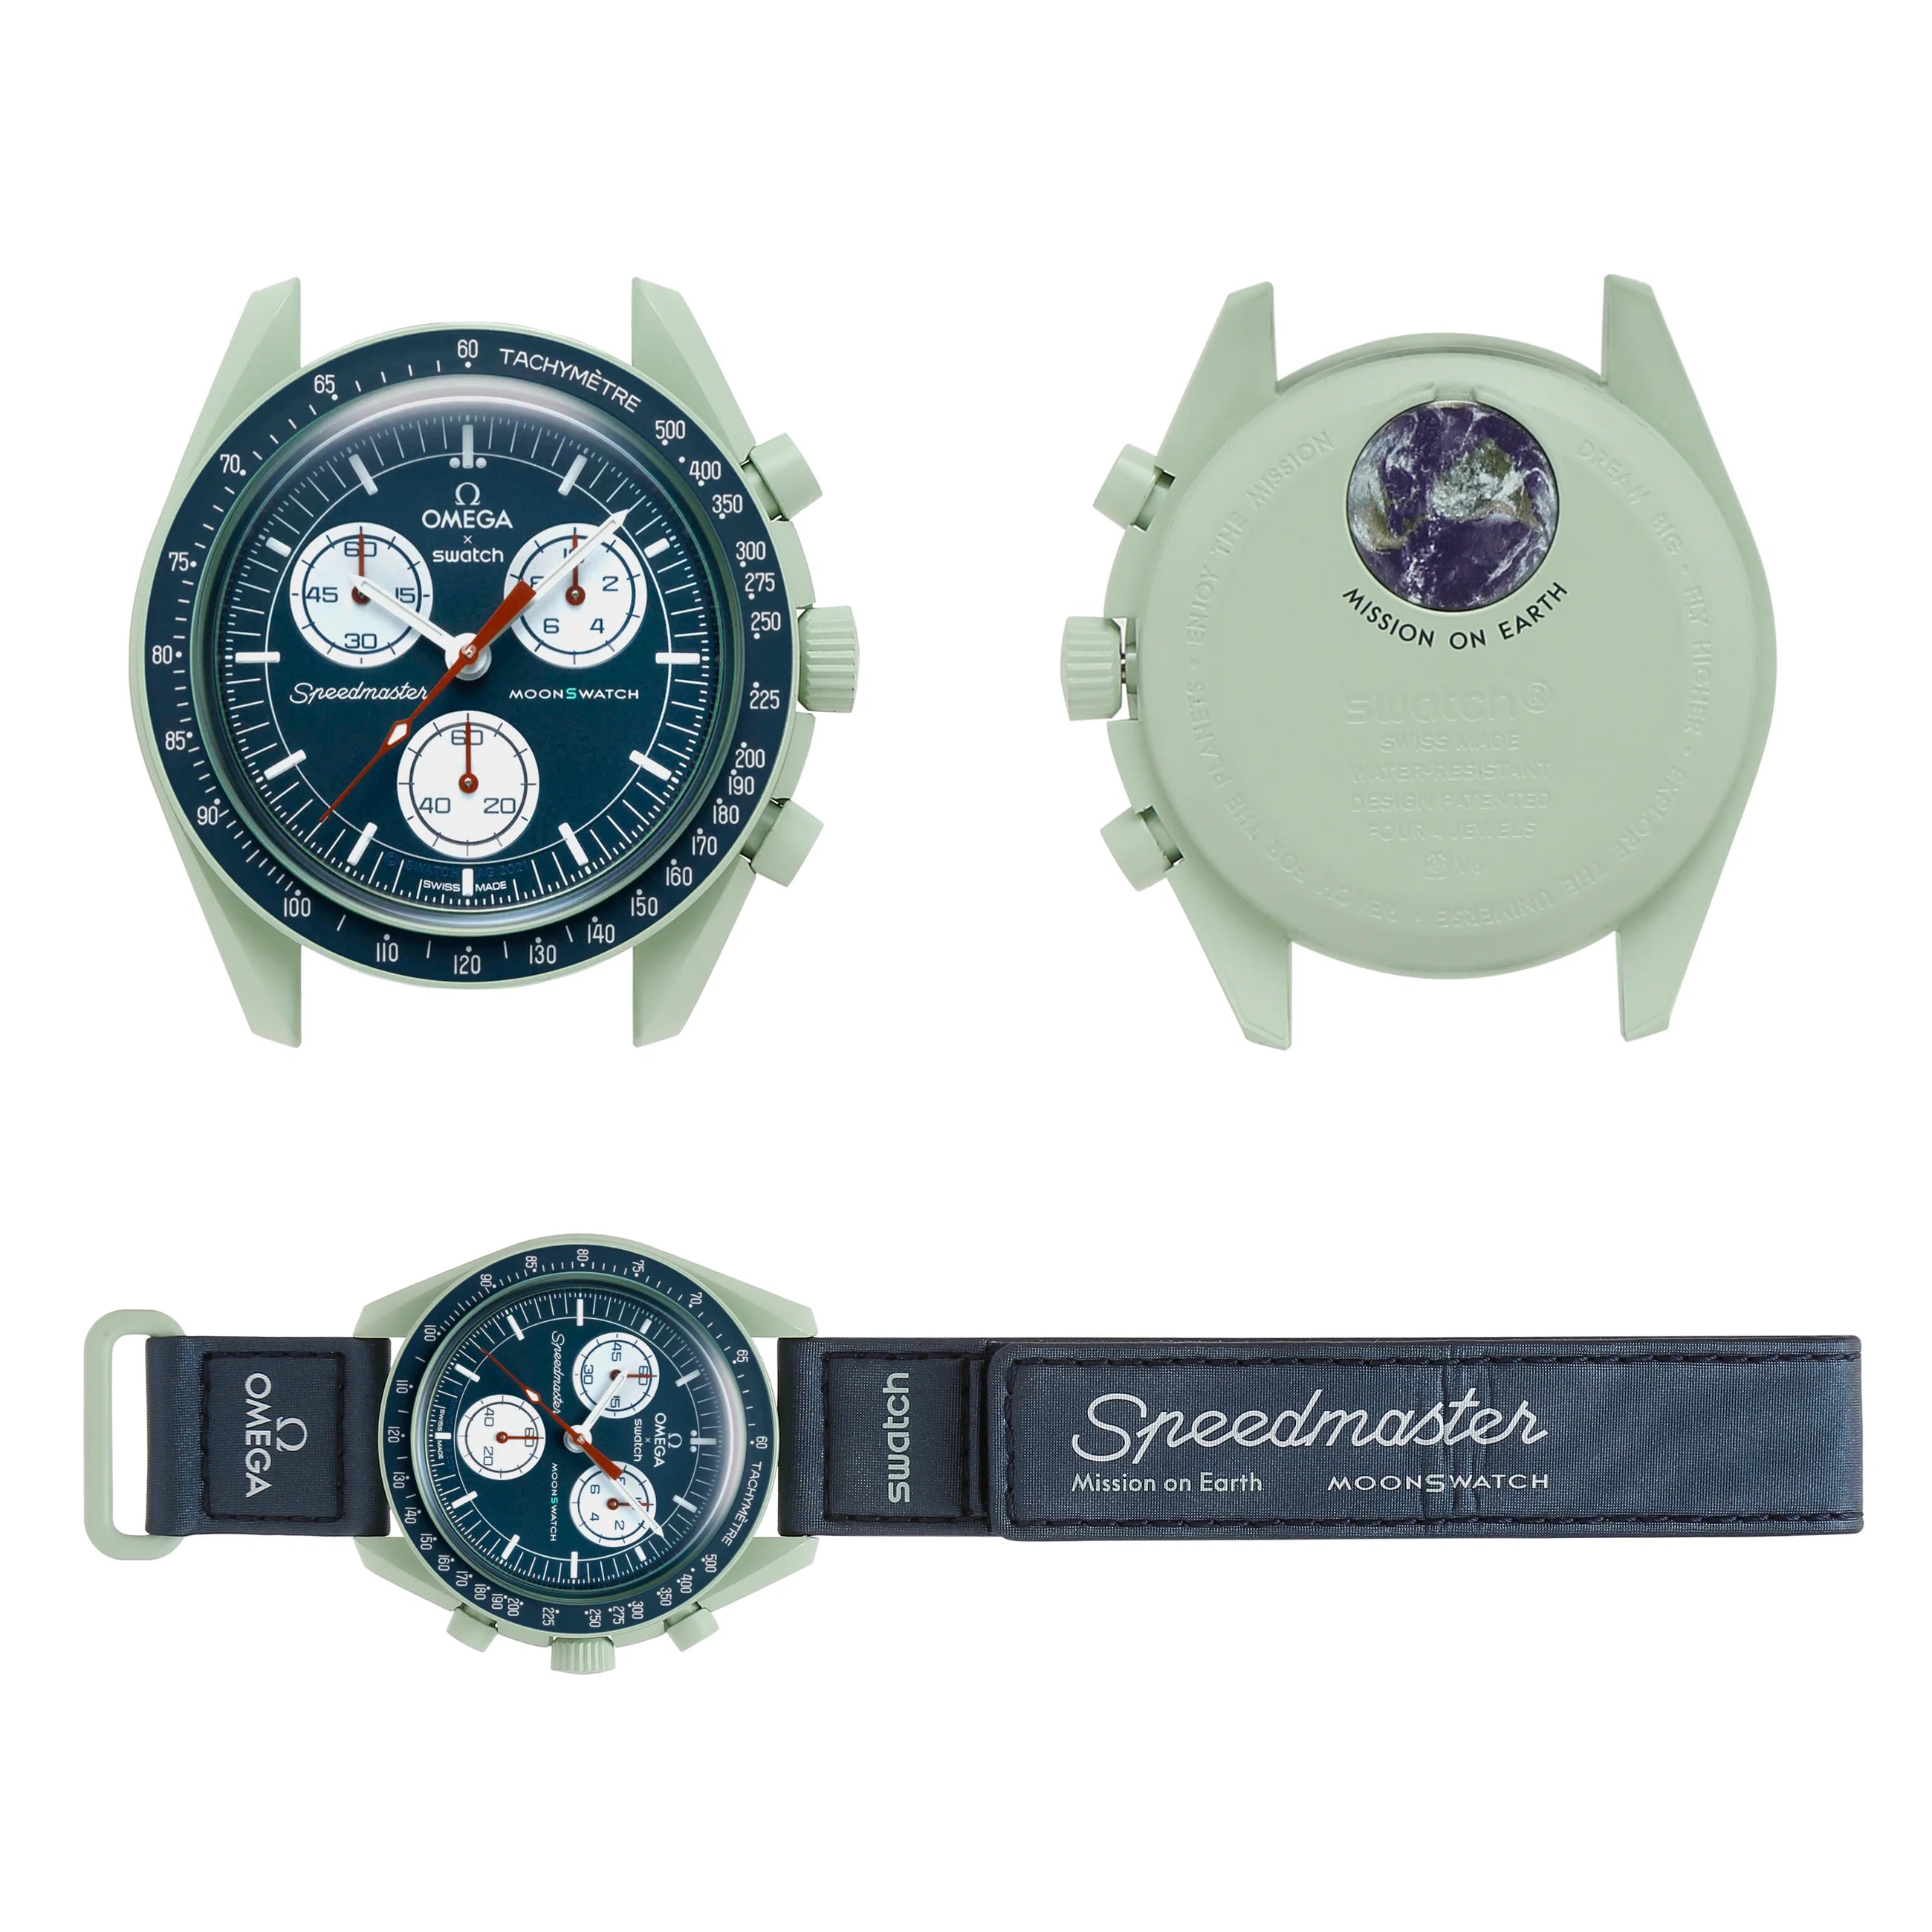 SWATCH X OMEGA BIOCERAMIC MOONSWATCH MISSION TO EARTH